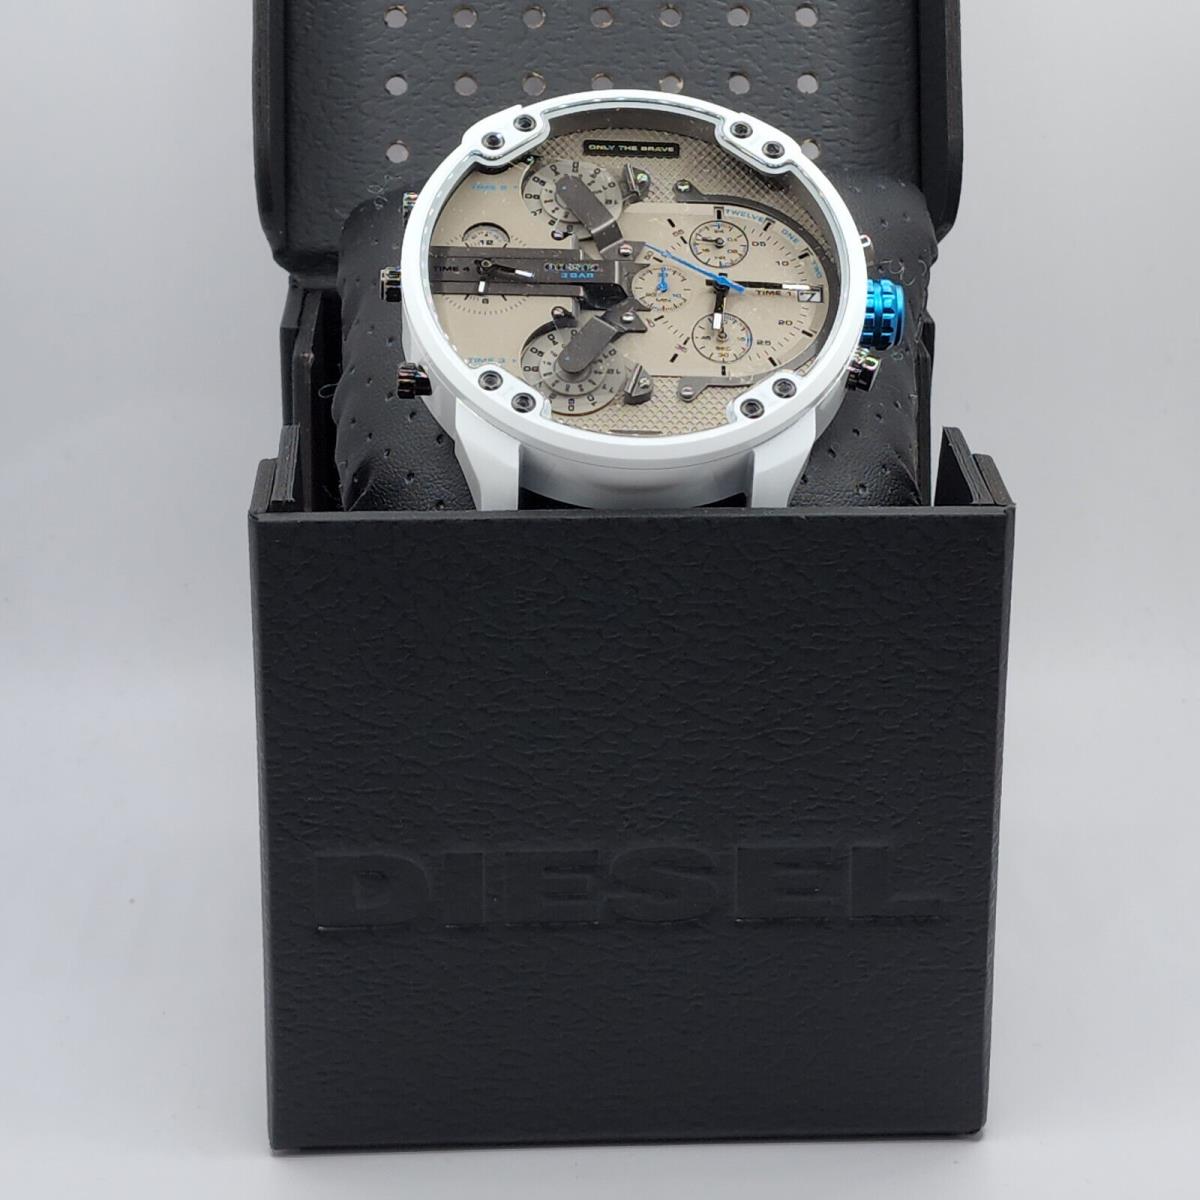 Diesel watch Daddy - Gray Dial, Gray Band, White Bezel 6